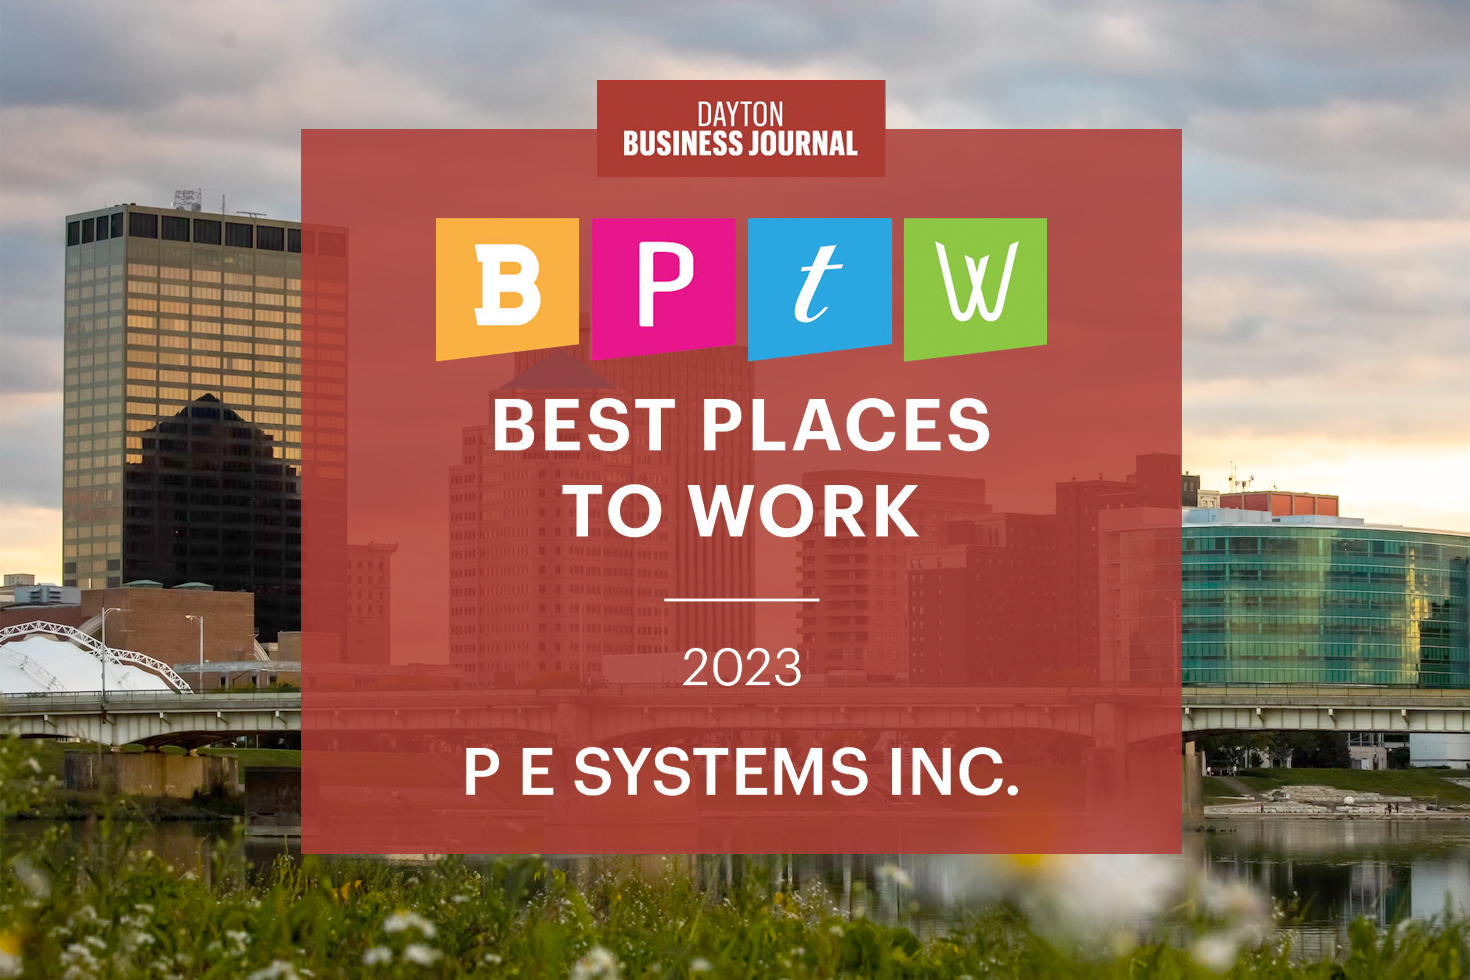 P E Systems Recognized as Best Places to Work in the Dayton Region for 2023